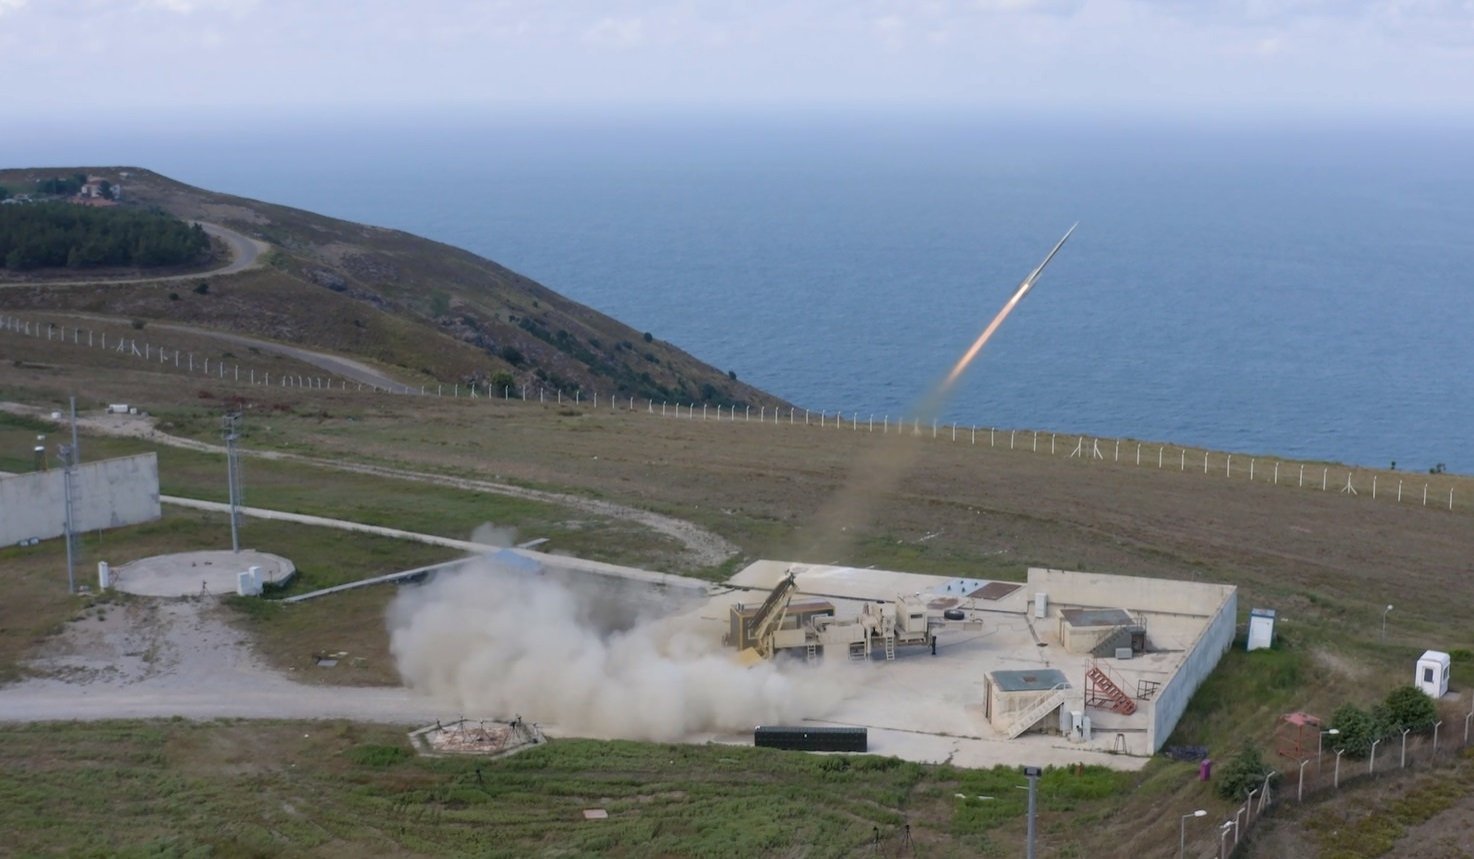 The firing test of the long-range surface-to-air missile air defense system Siper, in Sinop, northern Türkiye, Aug. 26, 2022. (Courtesy of Aselsan)